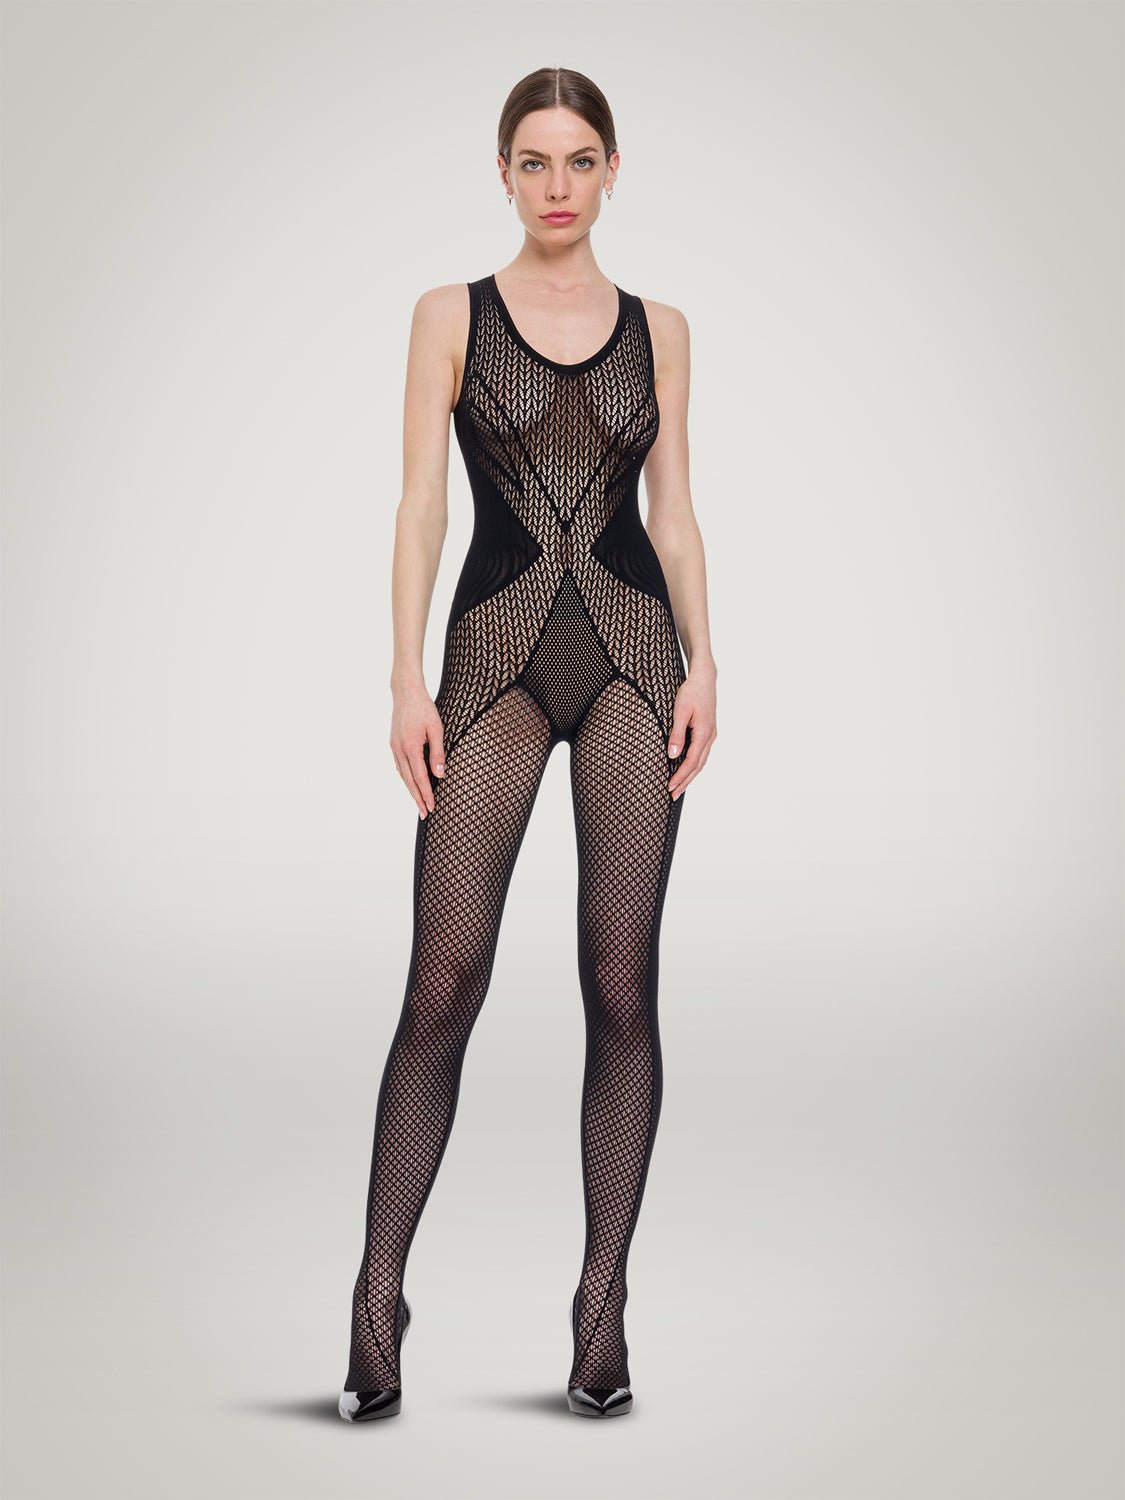 Wolford Romance Net Catsuit - Sugar Cookies Lingerie